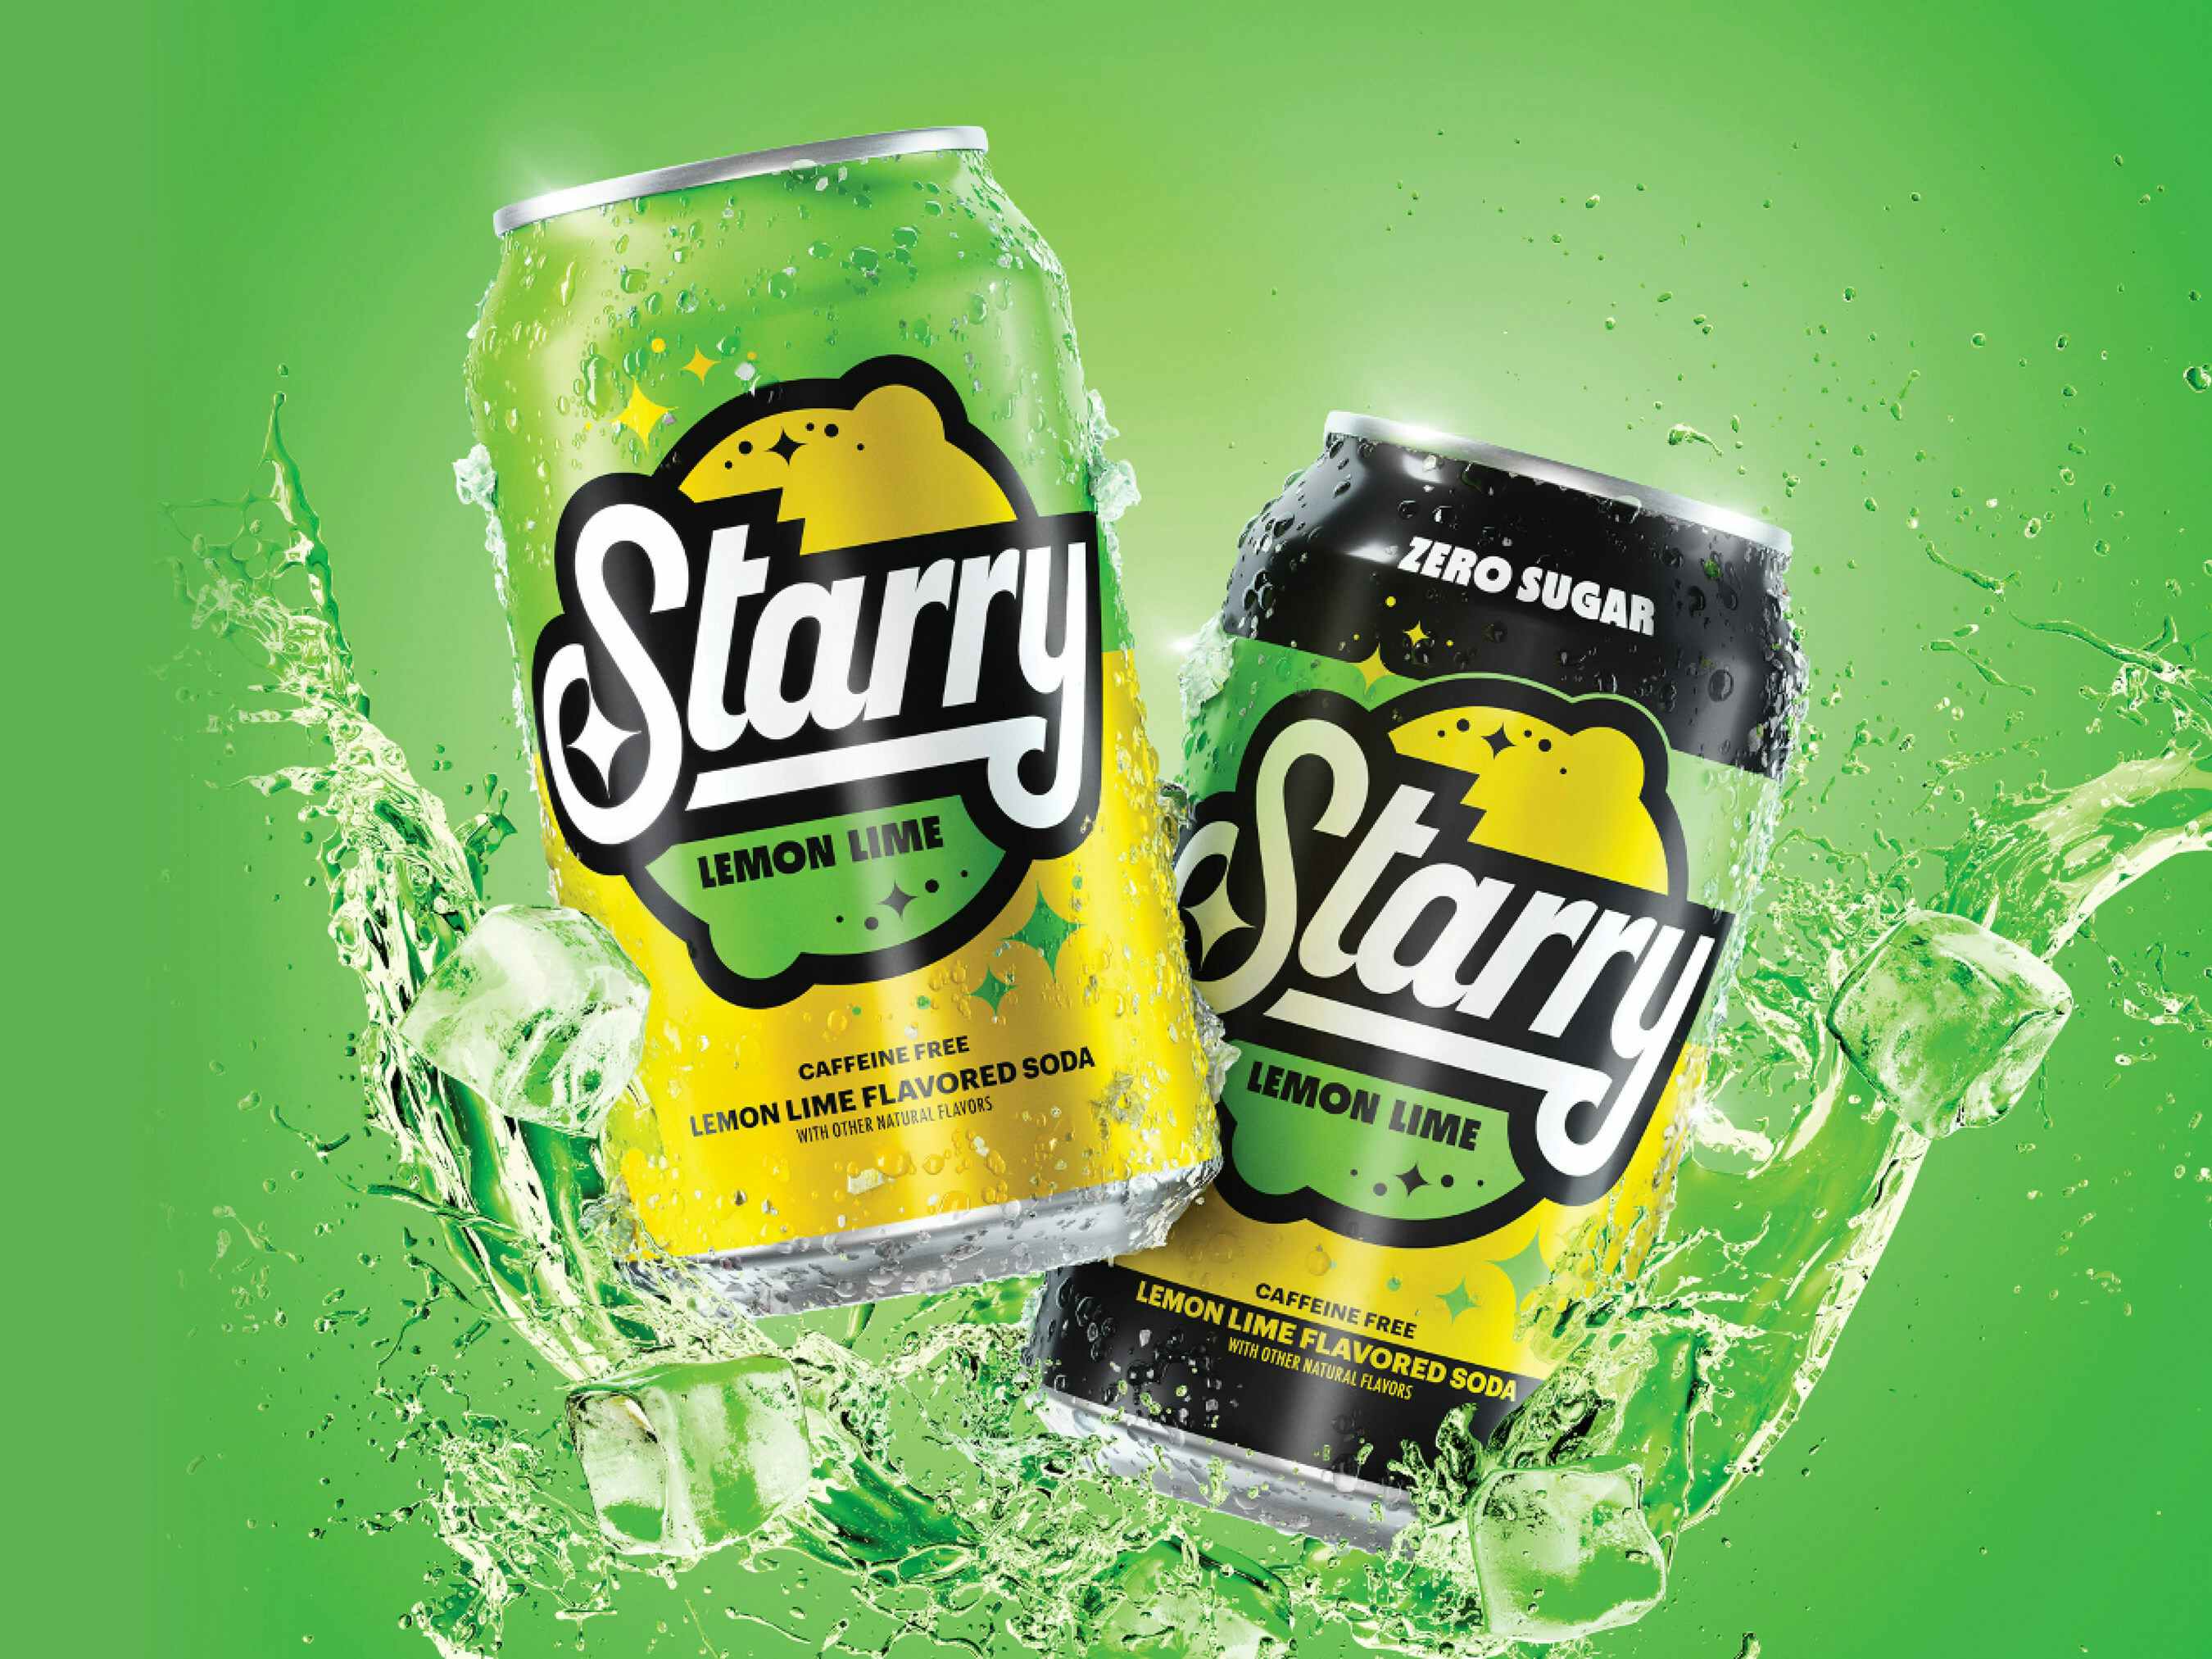 Starry soda cans in both the regular and zero calorie versions.